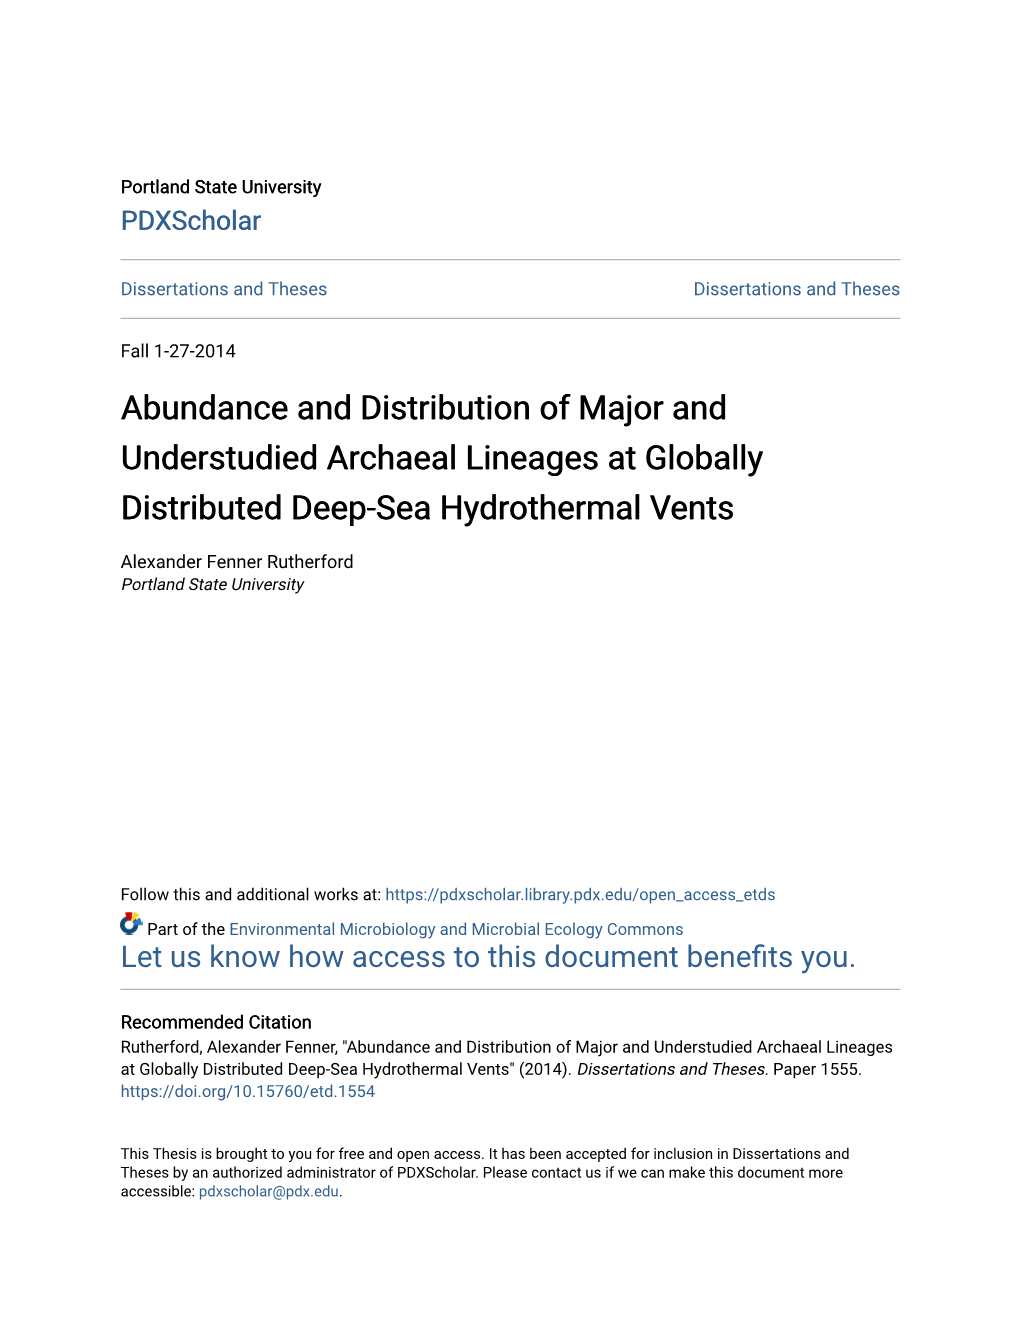 Abundance and Distribution of Major and Understudied Archaeal Lineages at Globally Distributed Deep-Sea Hydrothermal Vents